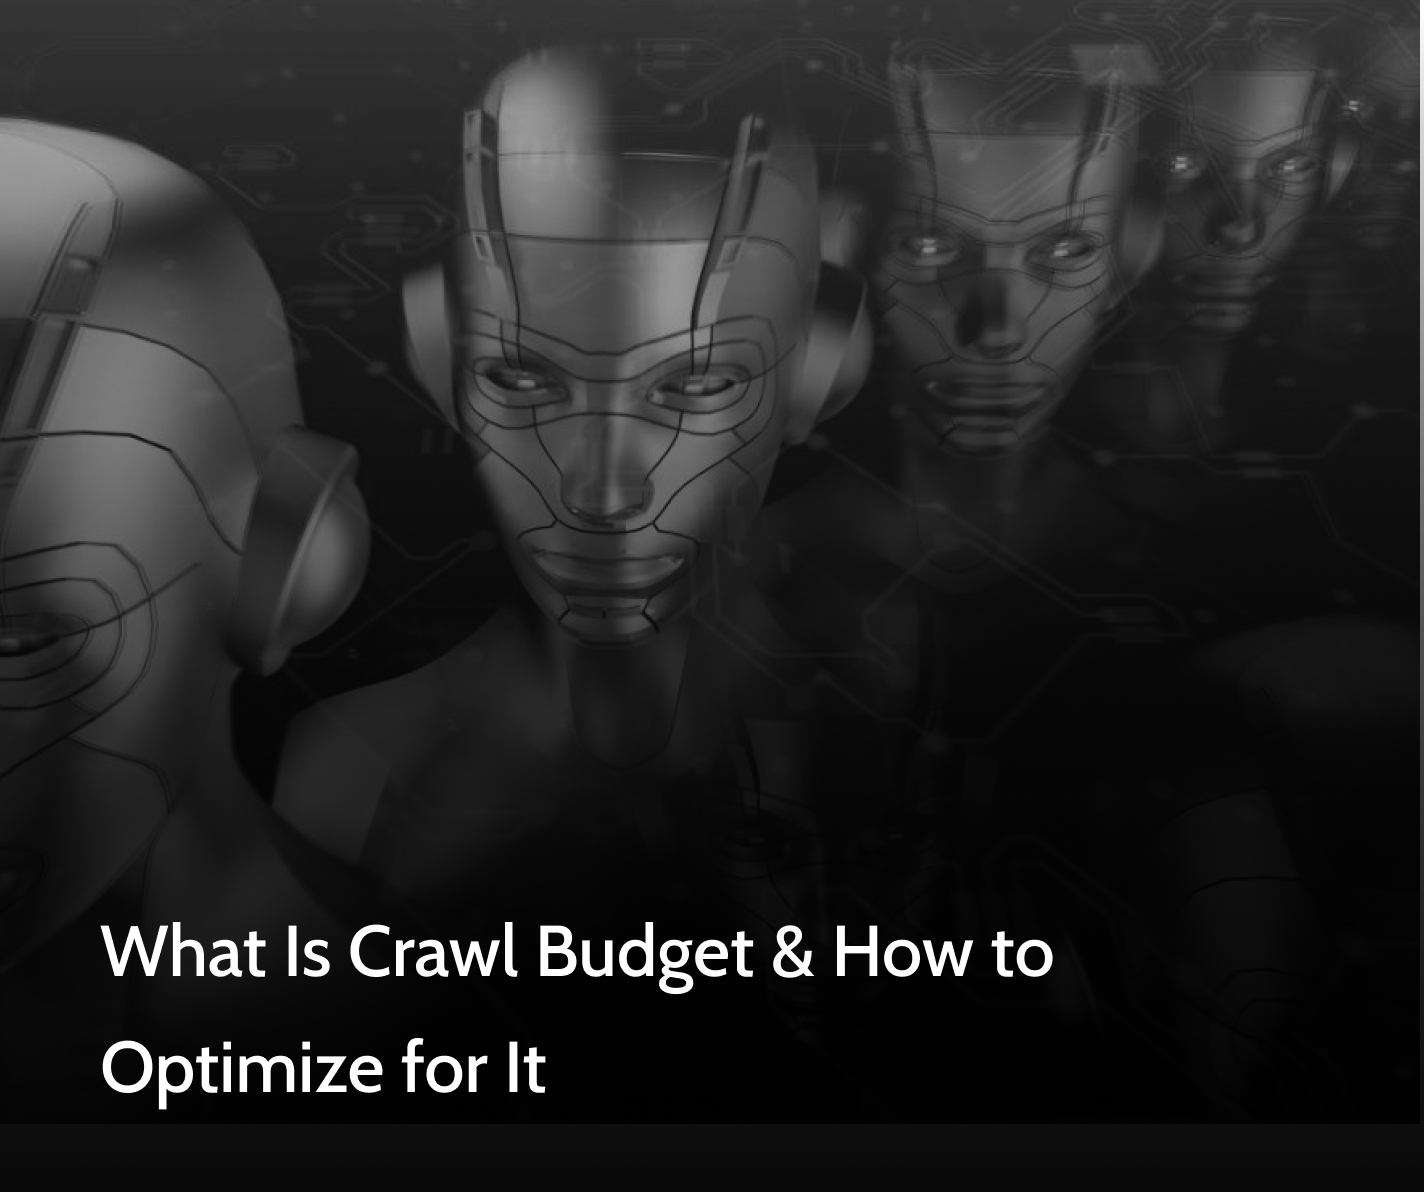 What Is Crawl Budget & How to Optimize for It